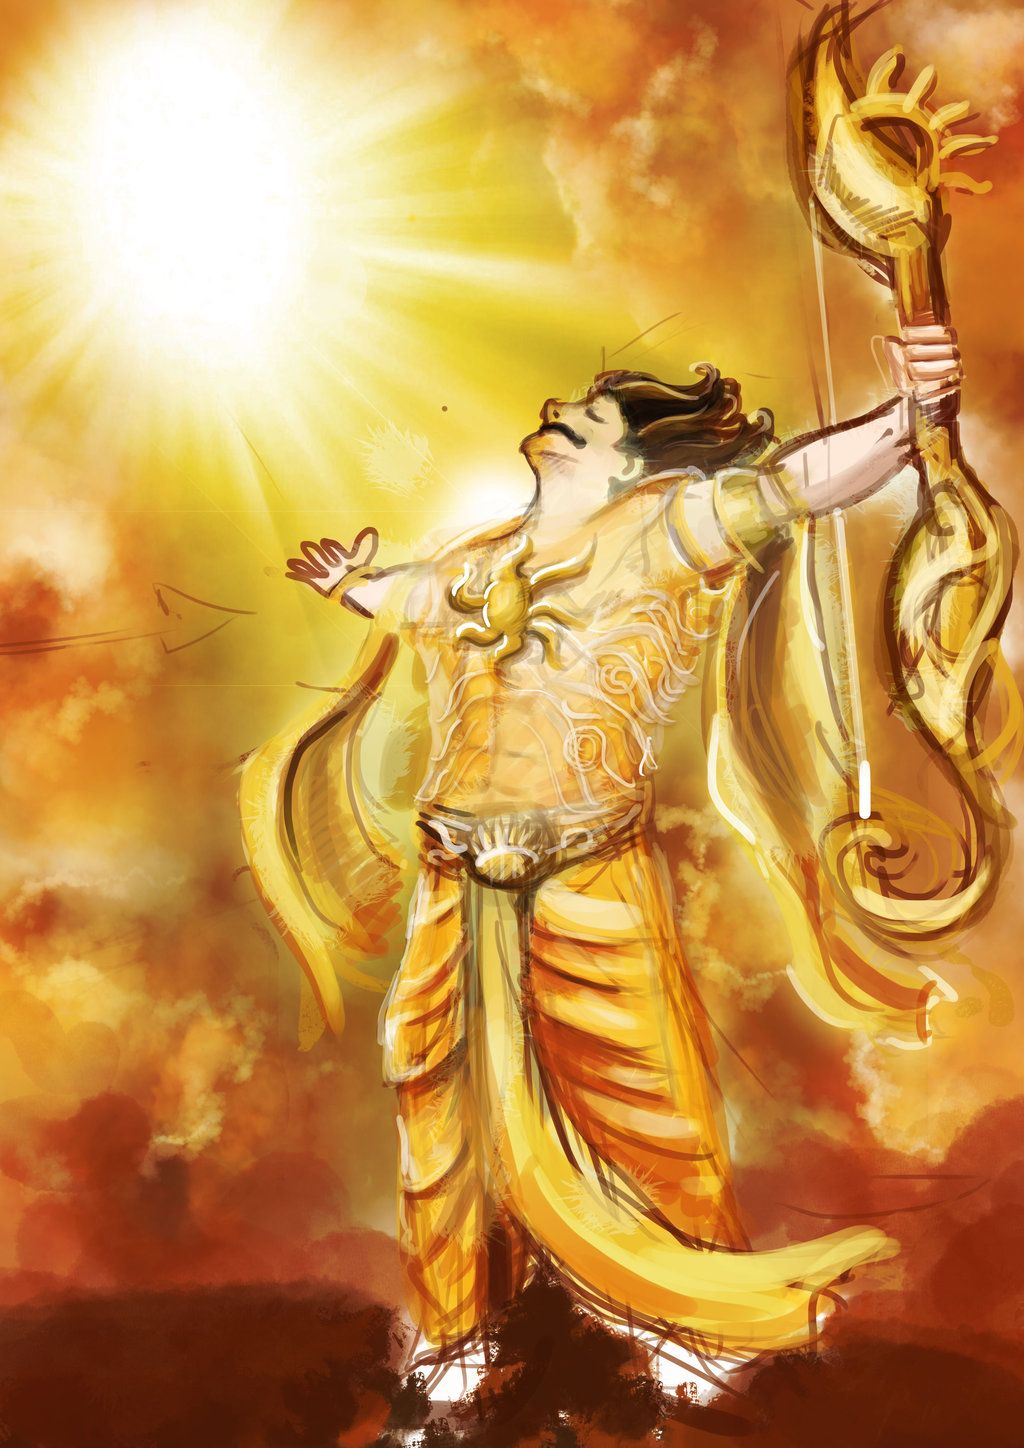 Mahabharat Karna Hd Wallpapers 1080P : About 5% of these are wallpapers